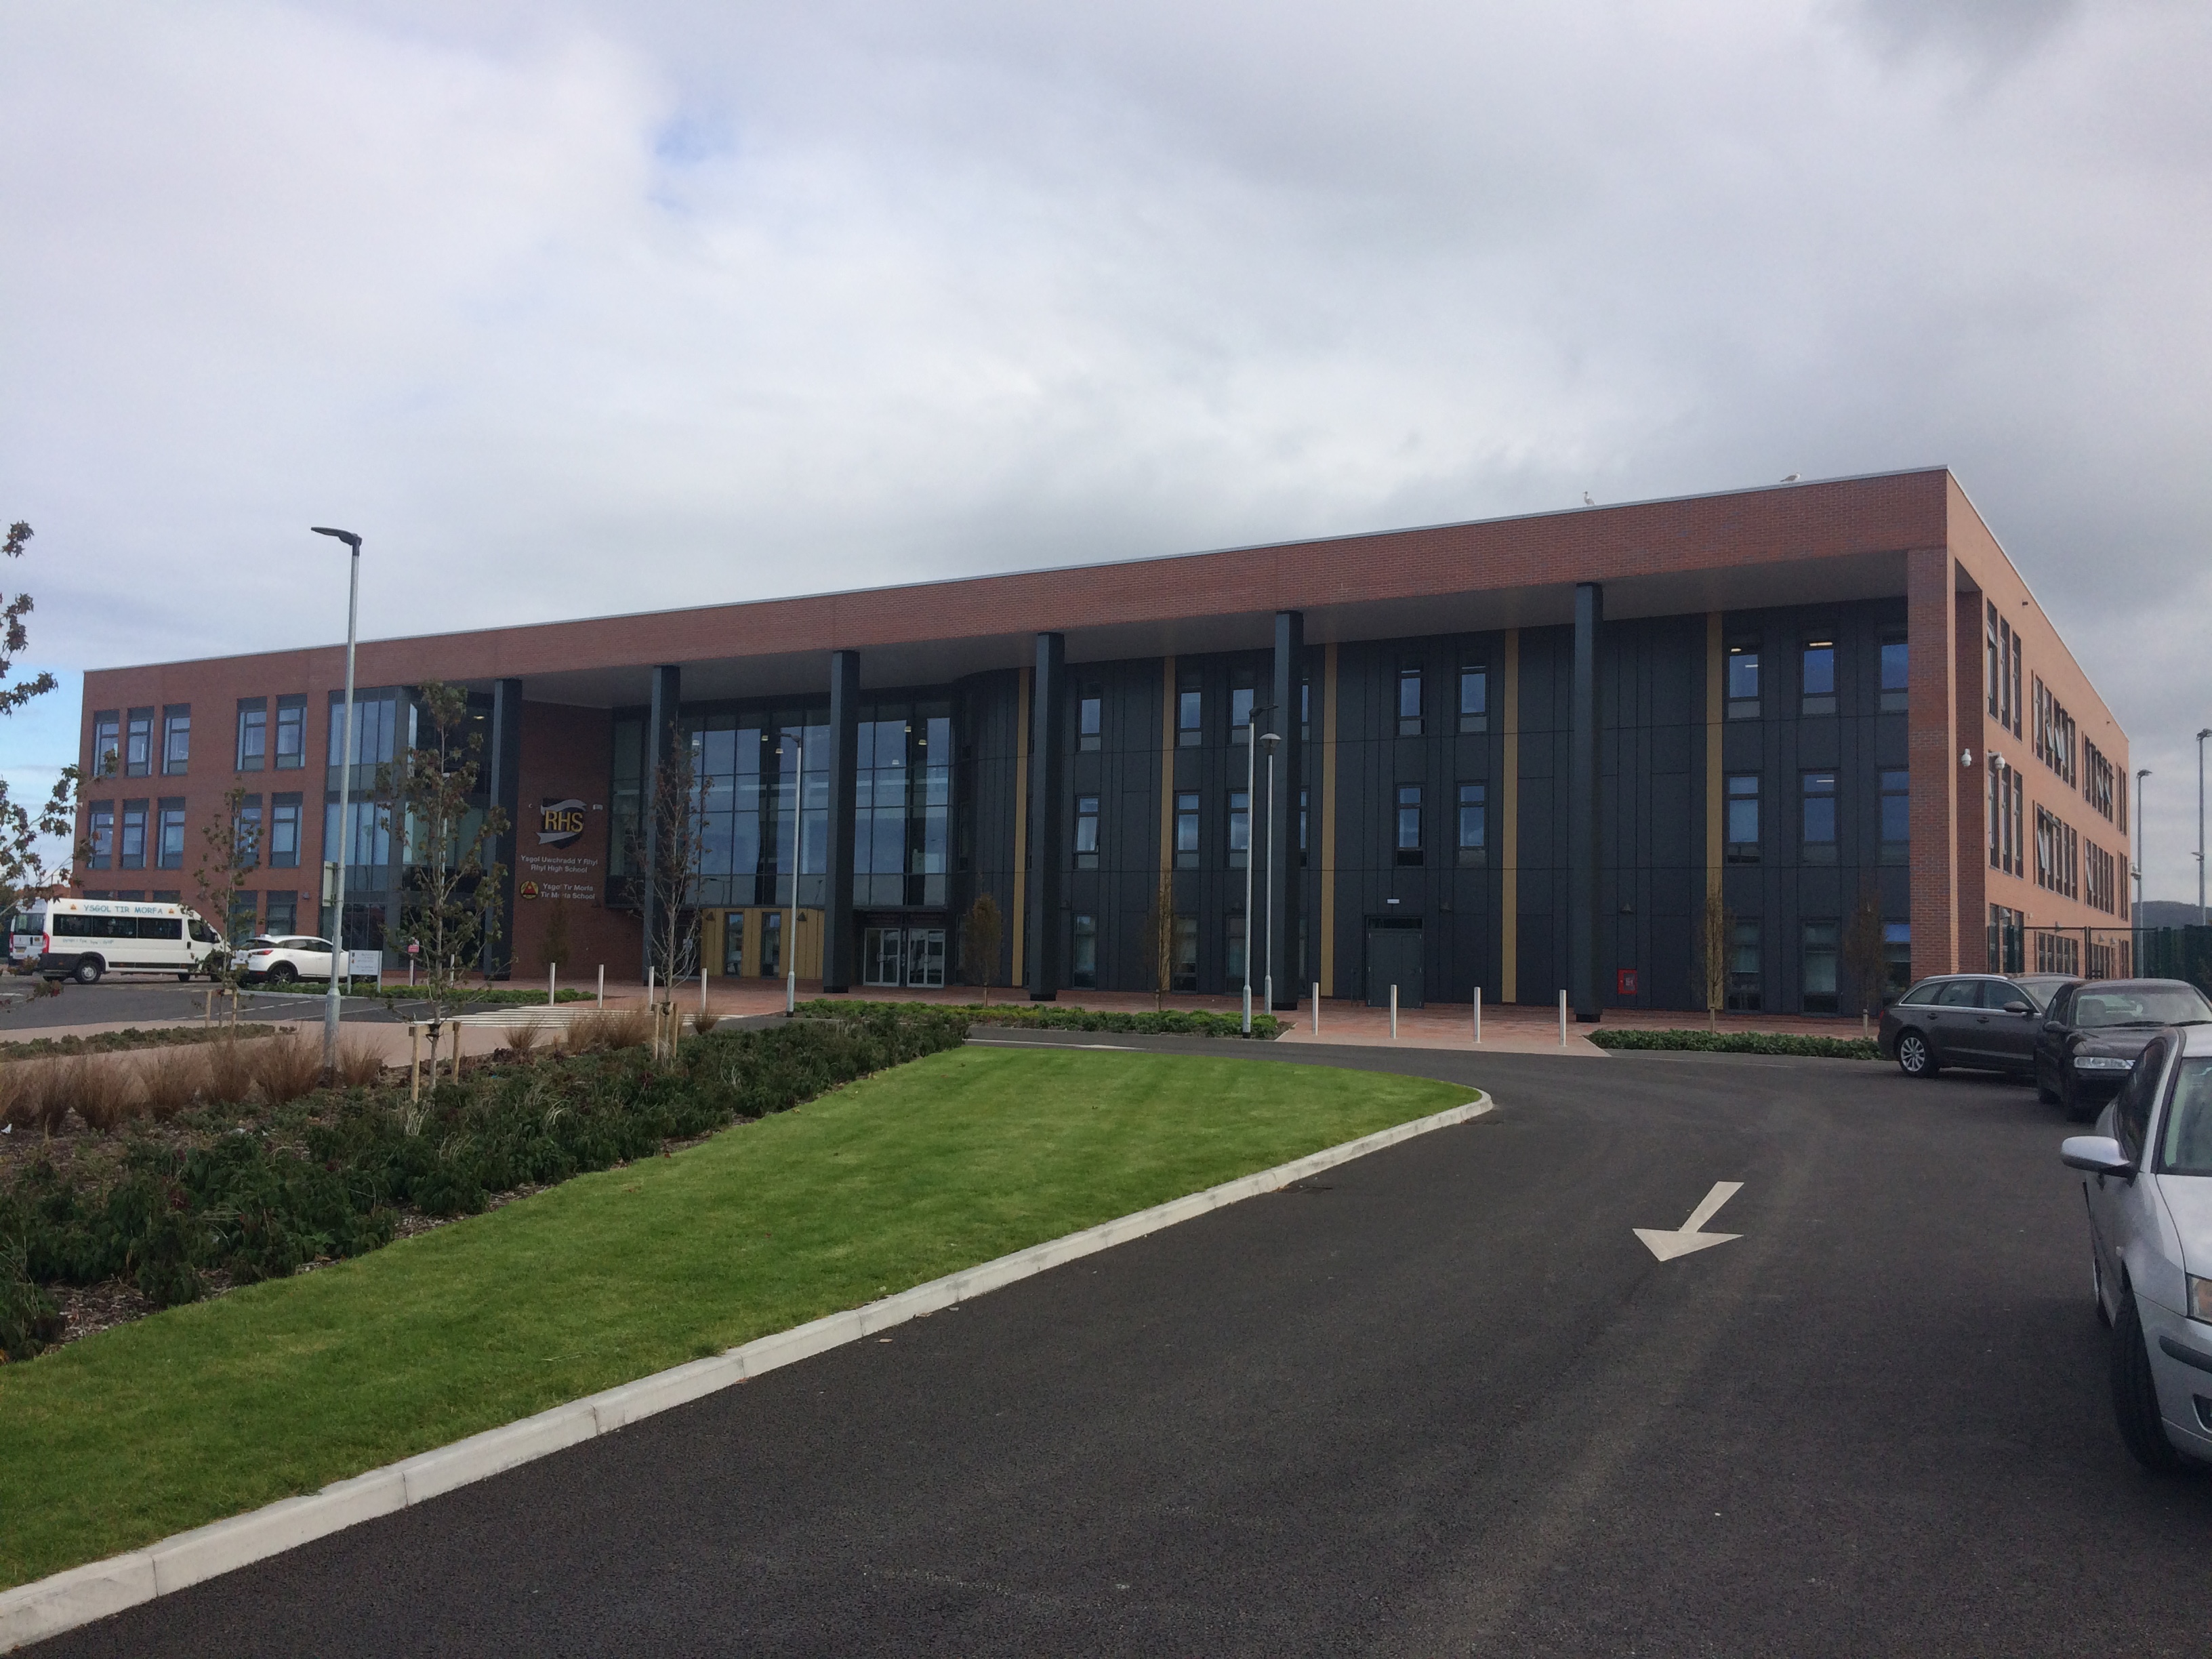 Report by Len Threadgold on Rhyl High School Official opening